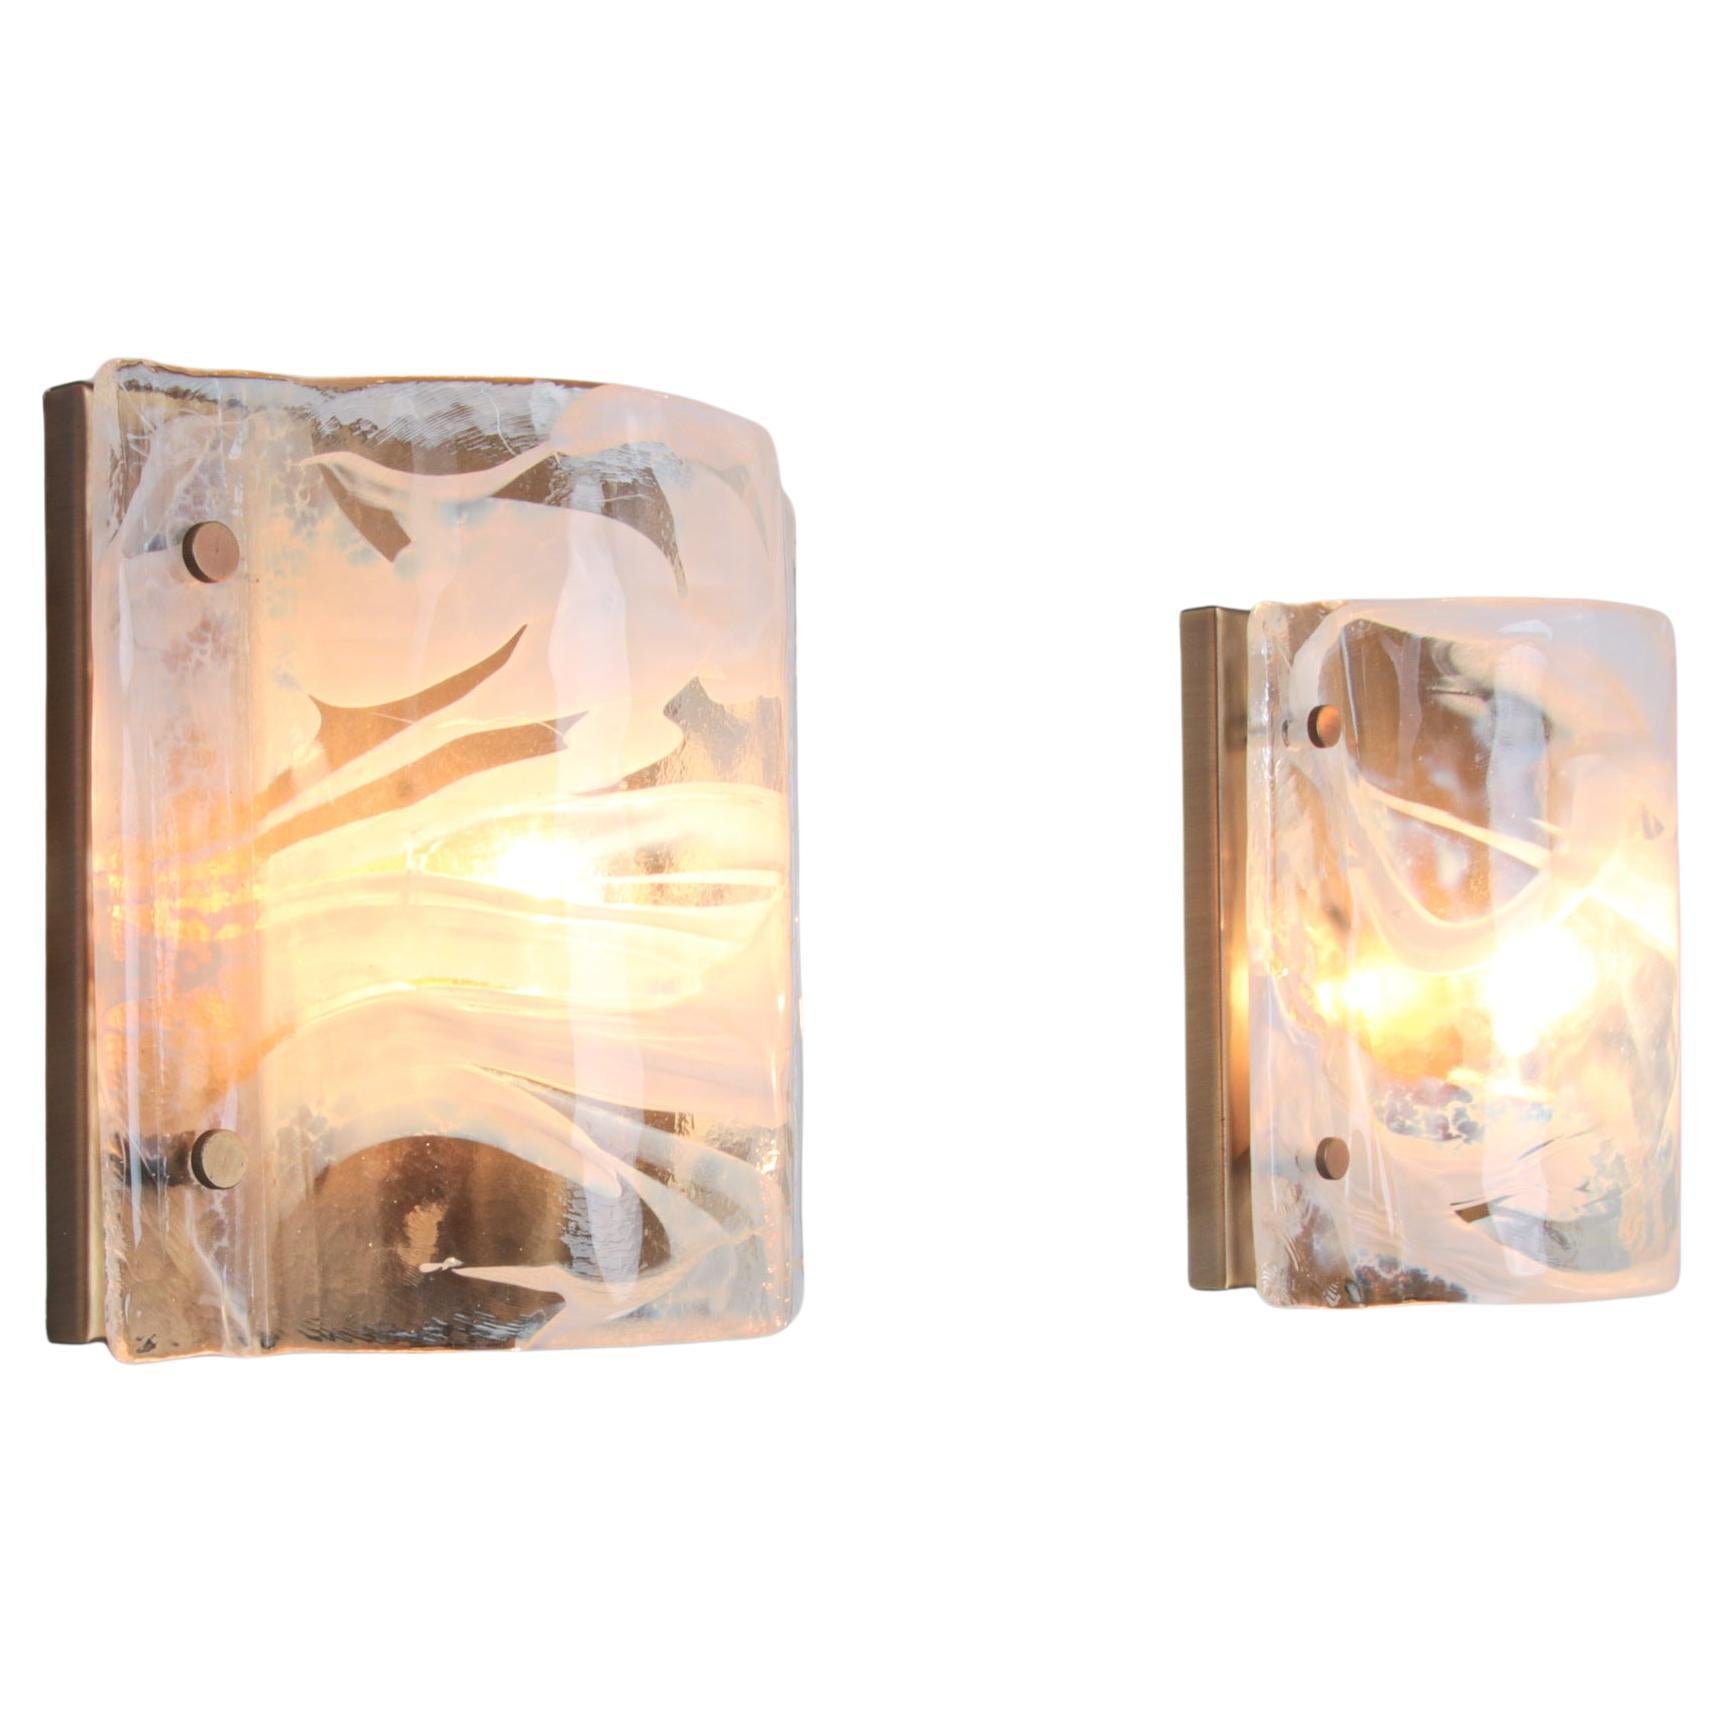 Pair of Vintage Hillebrand Wall Sconces in Murano Glass, Germany 1960s